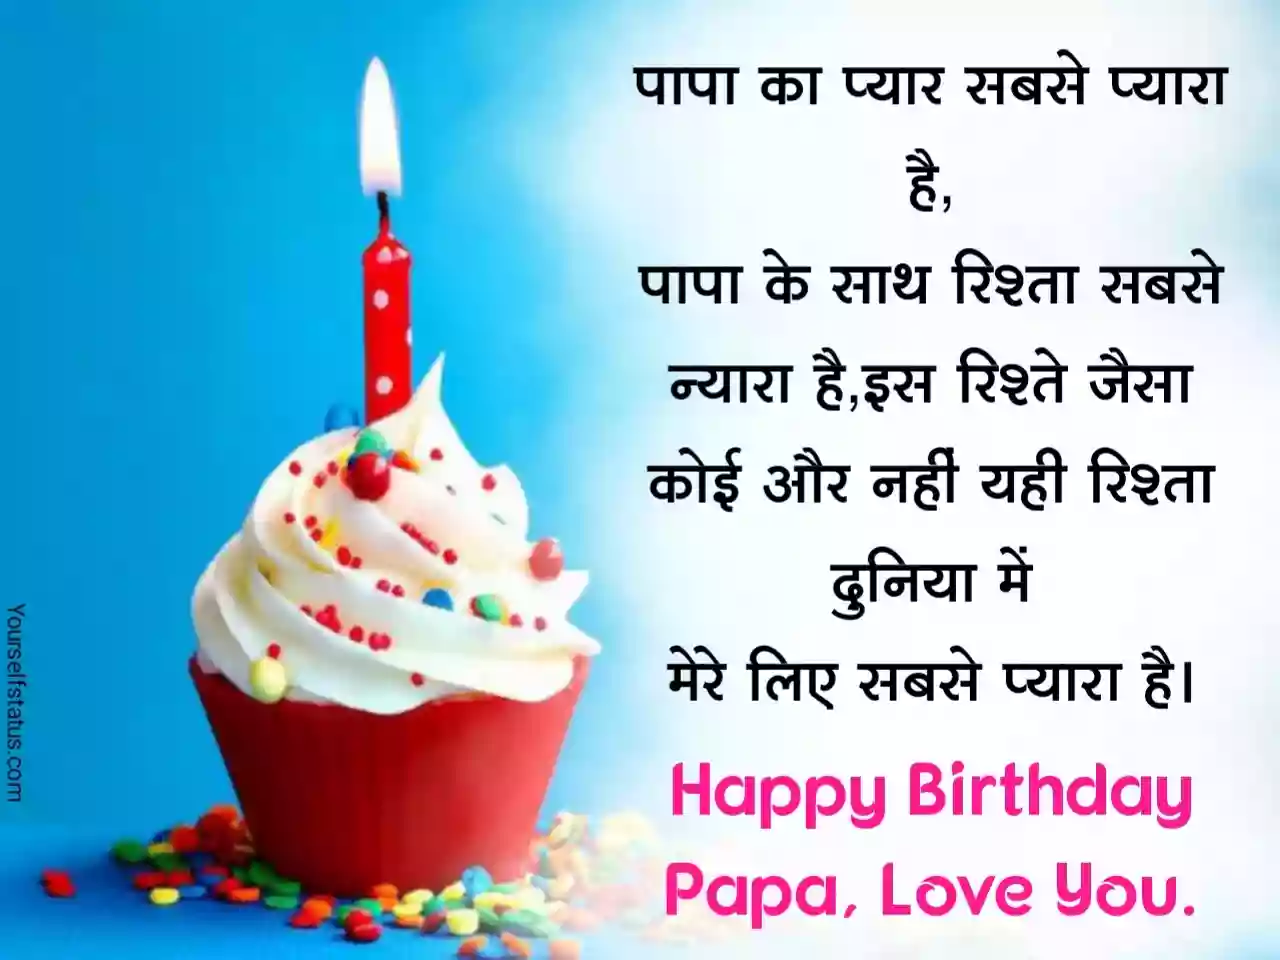 Happy birthday father images in hindi